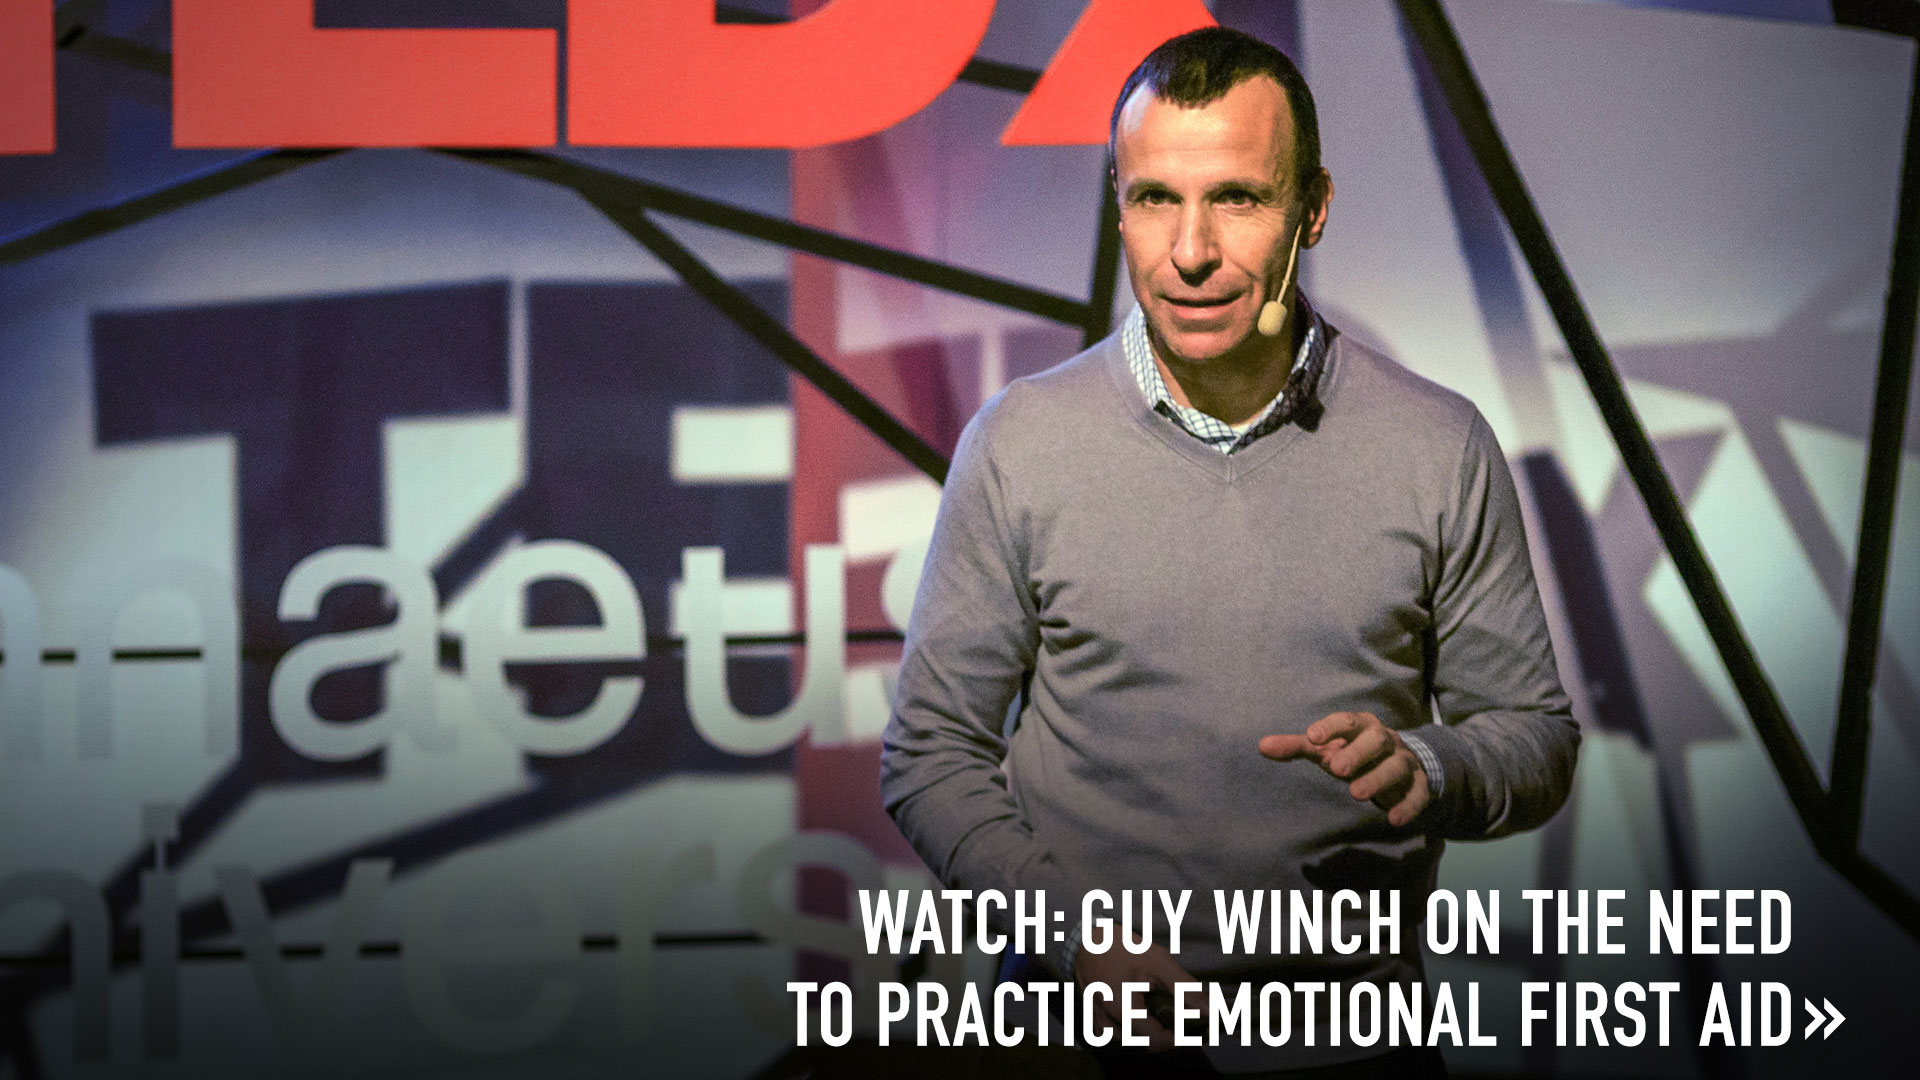 guy_winch_emotional_first_aid_TEDTalk